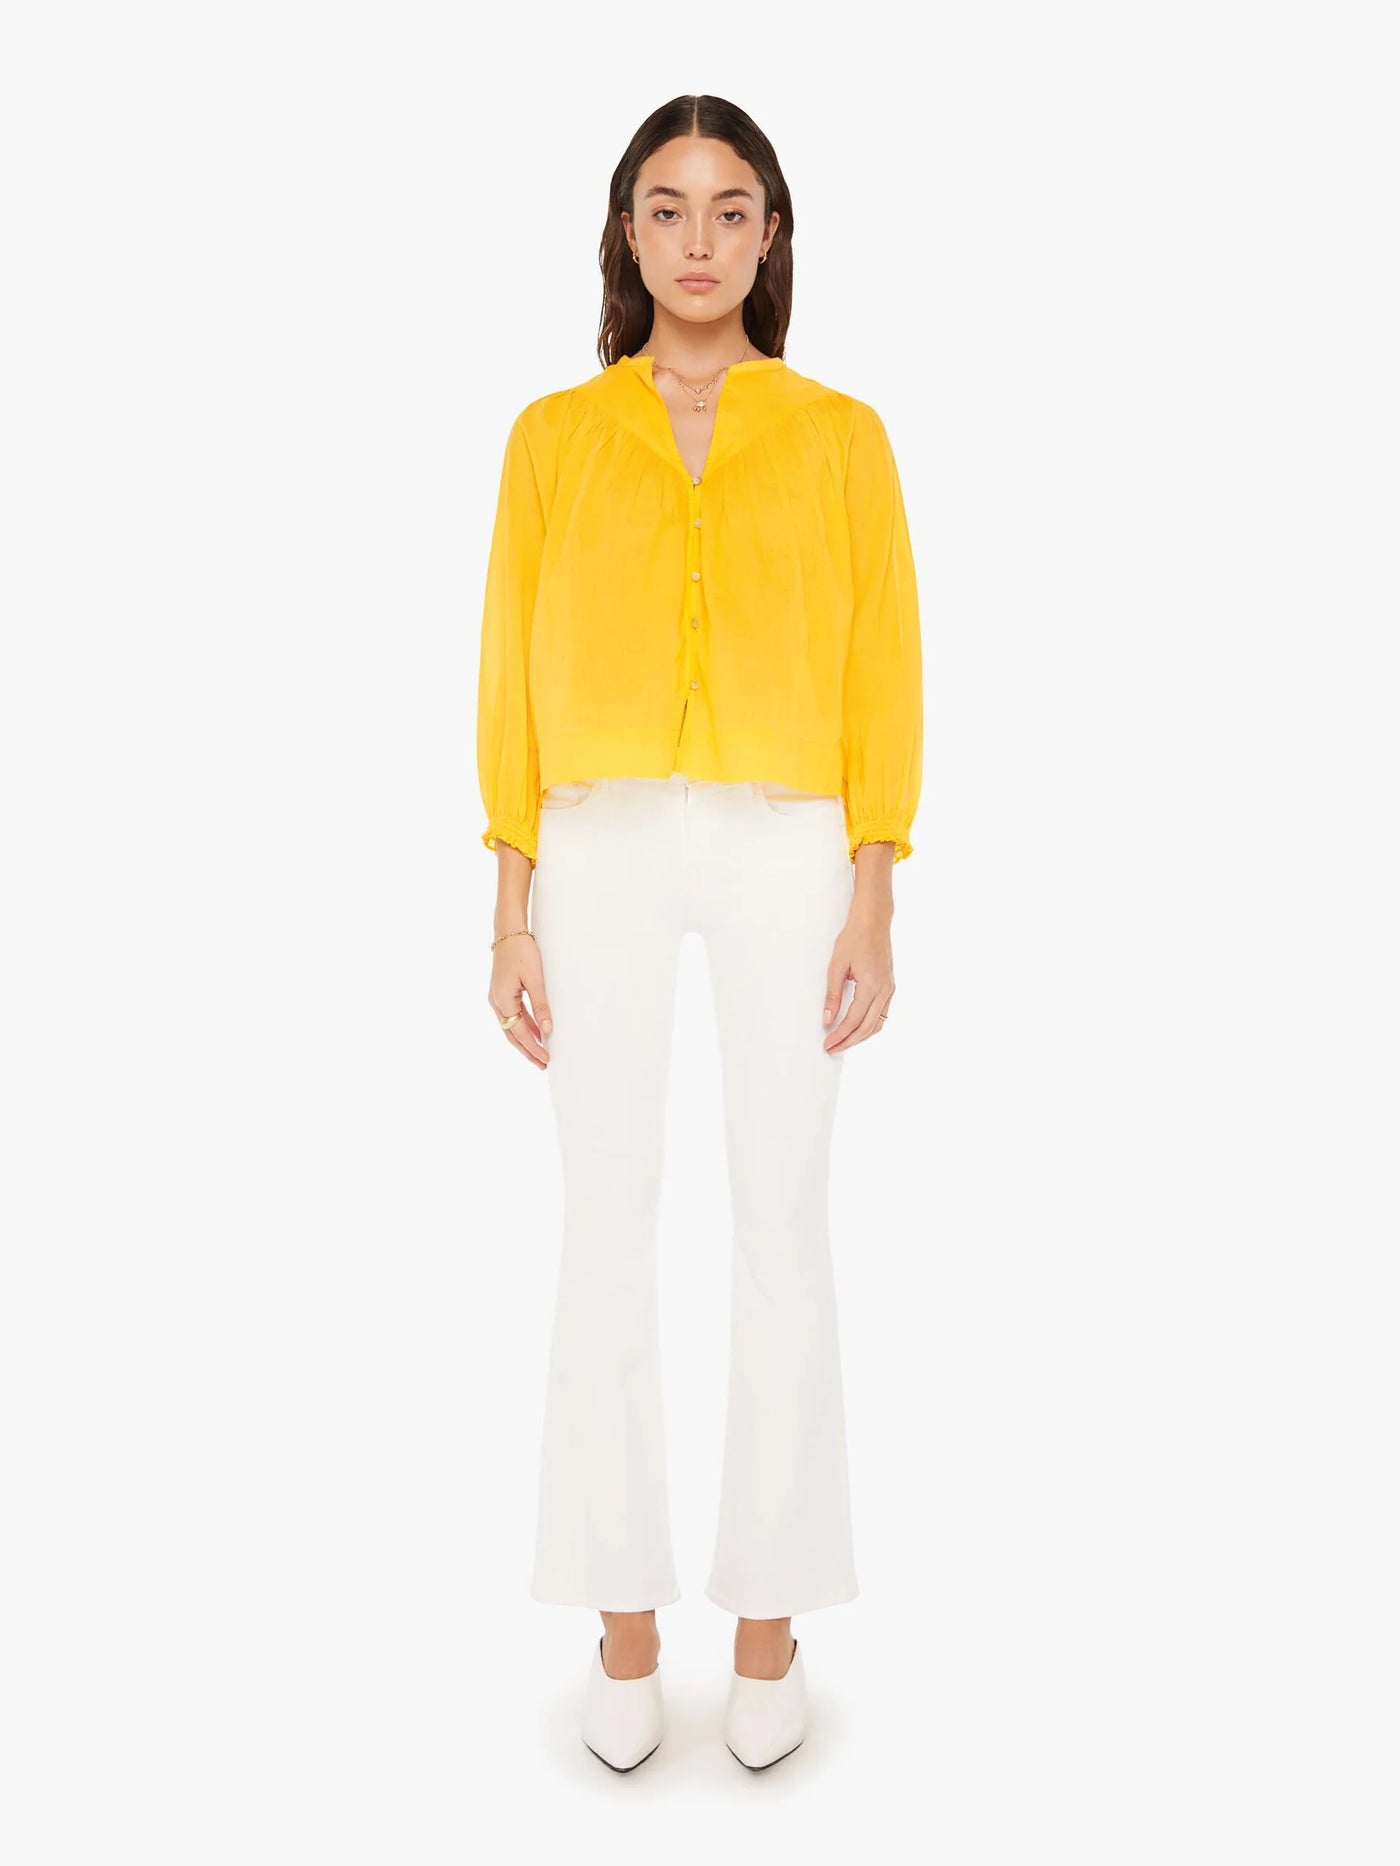 THE LOVE DEARLY TOP IN YELLOW CHROME - Romi Boutique